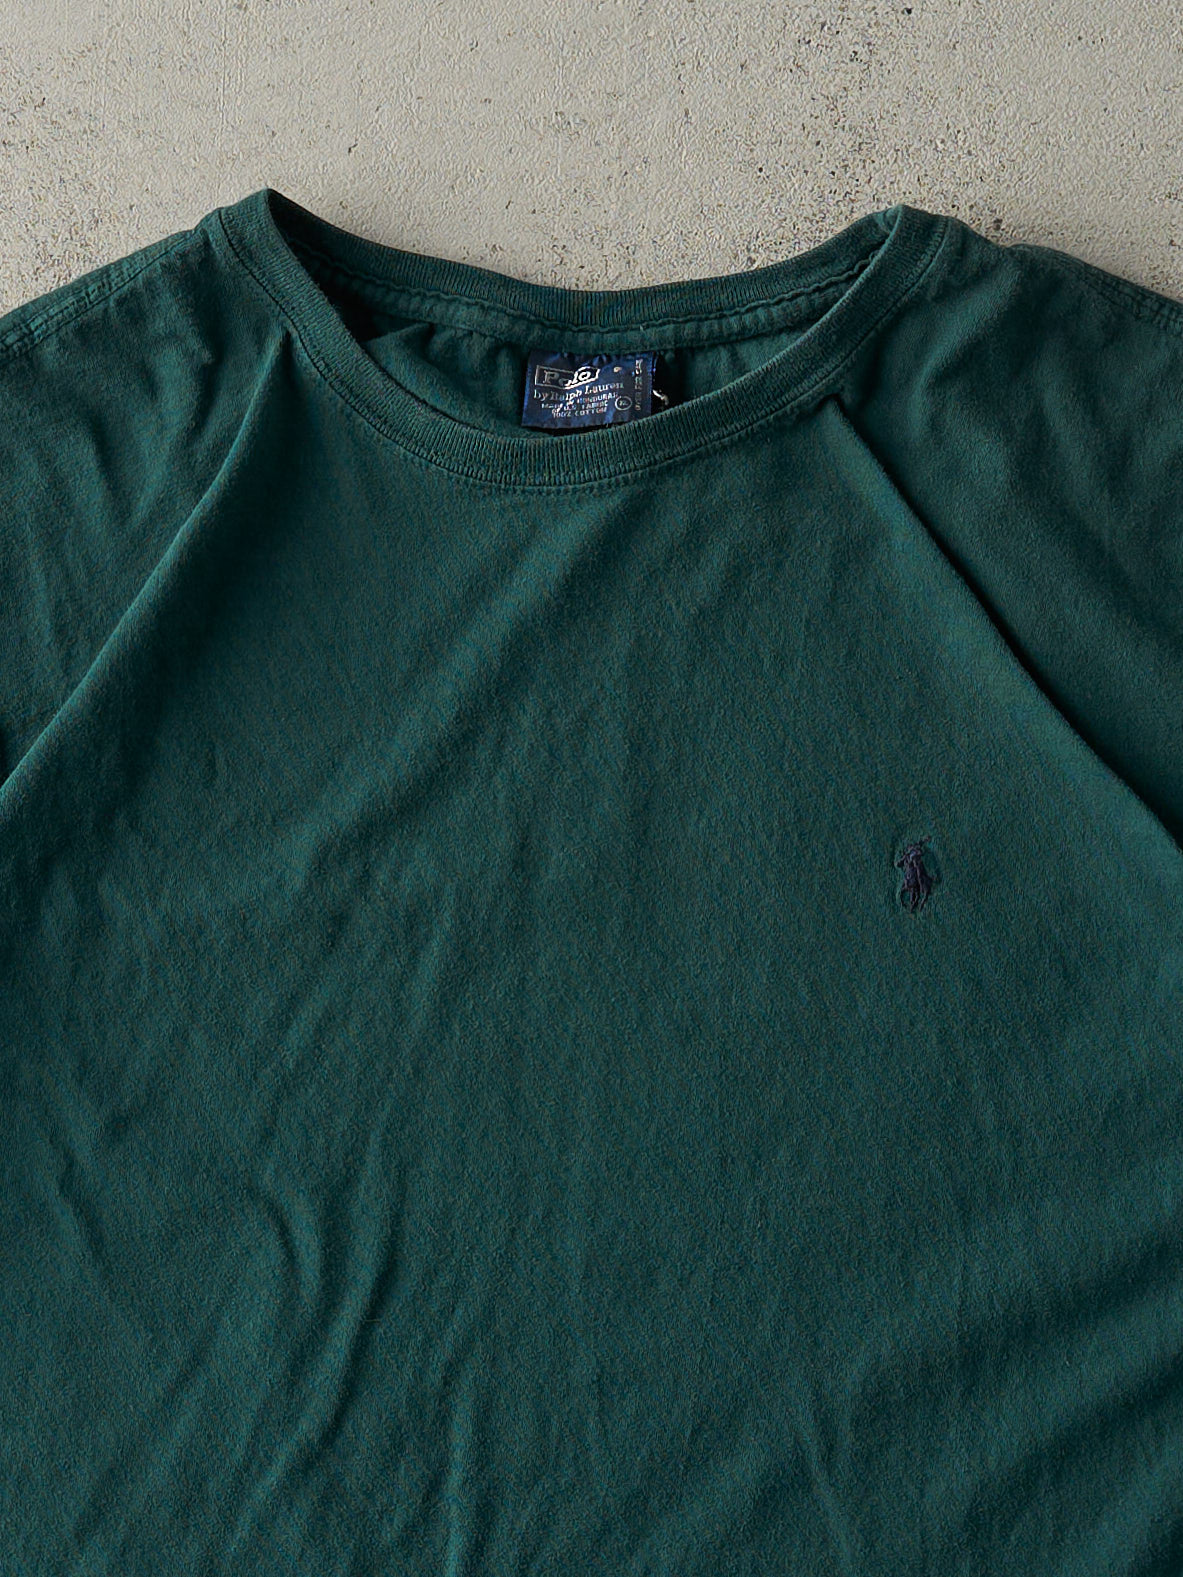 Vintage 90s Forest Green Embroidered Polo Tee (L)